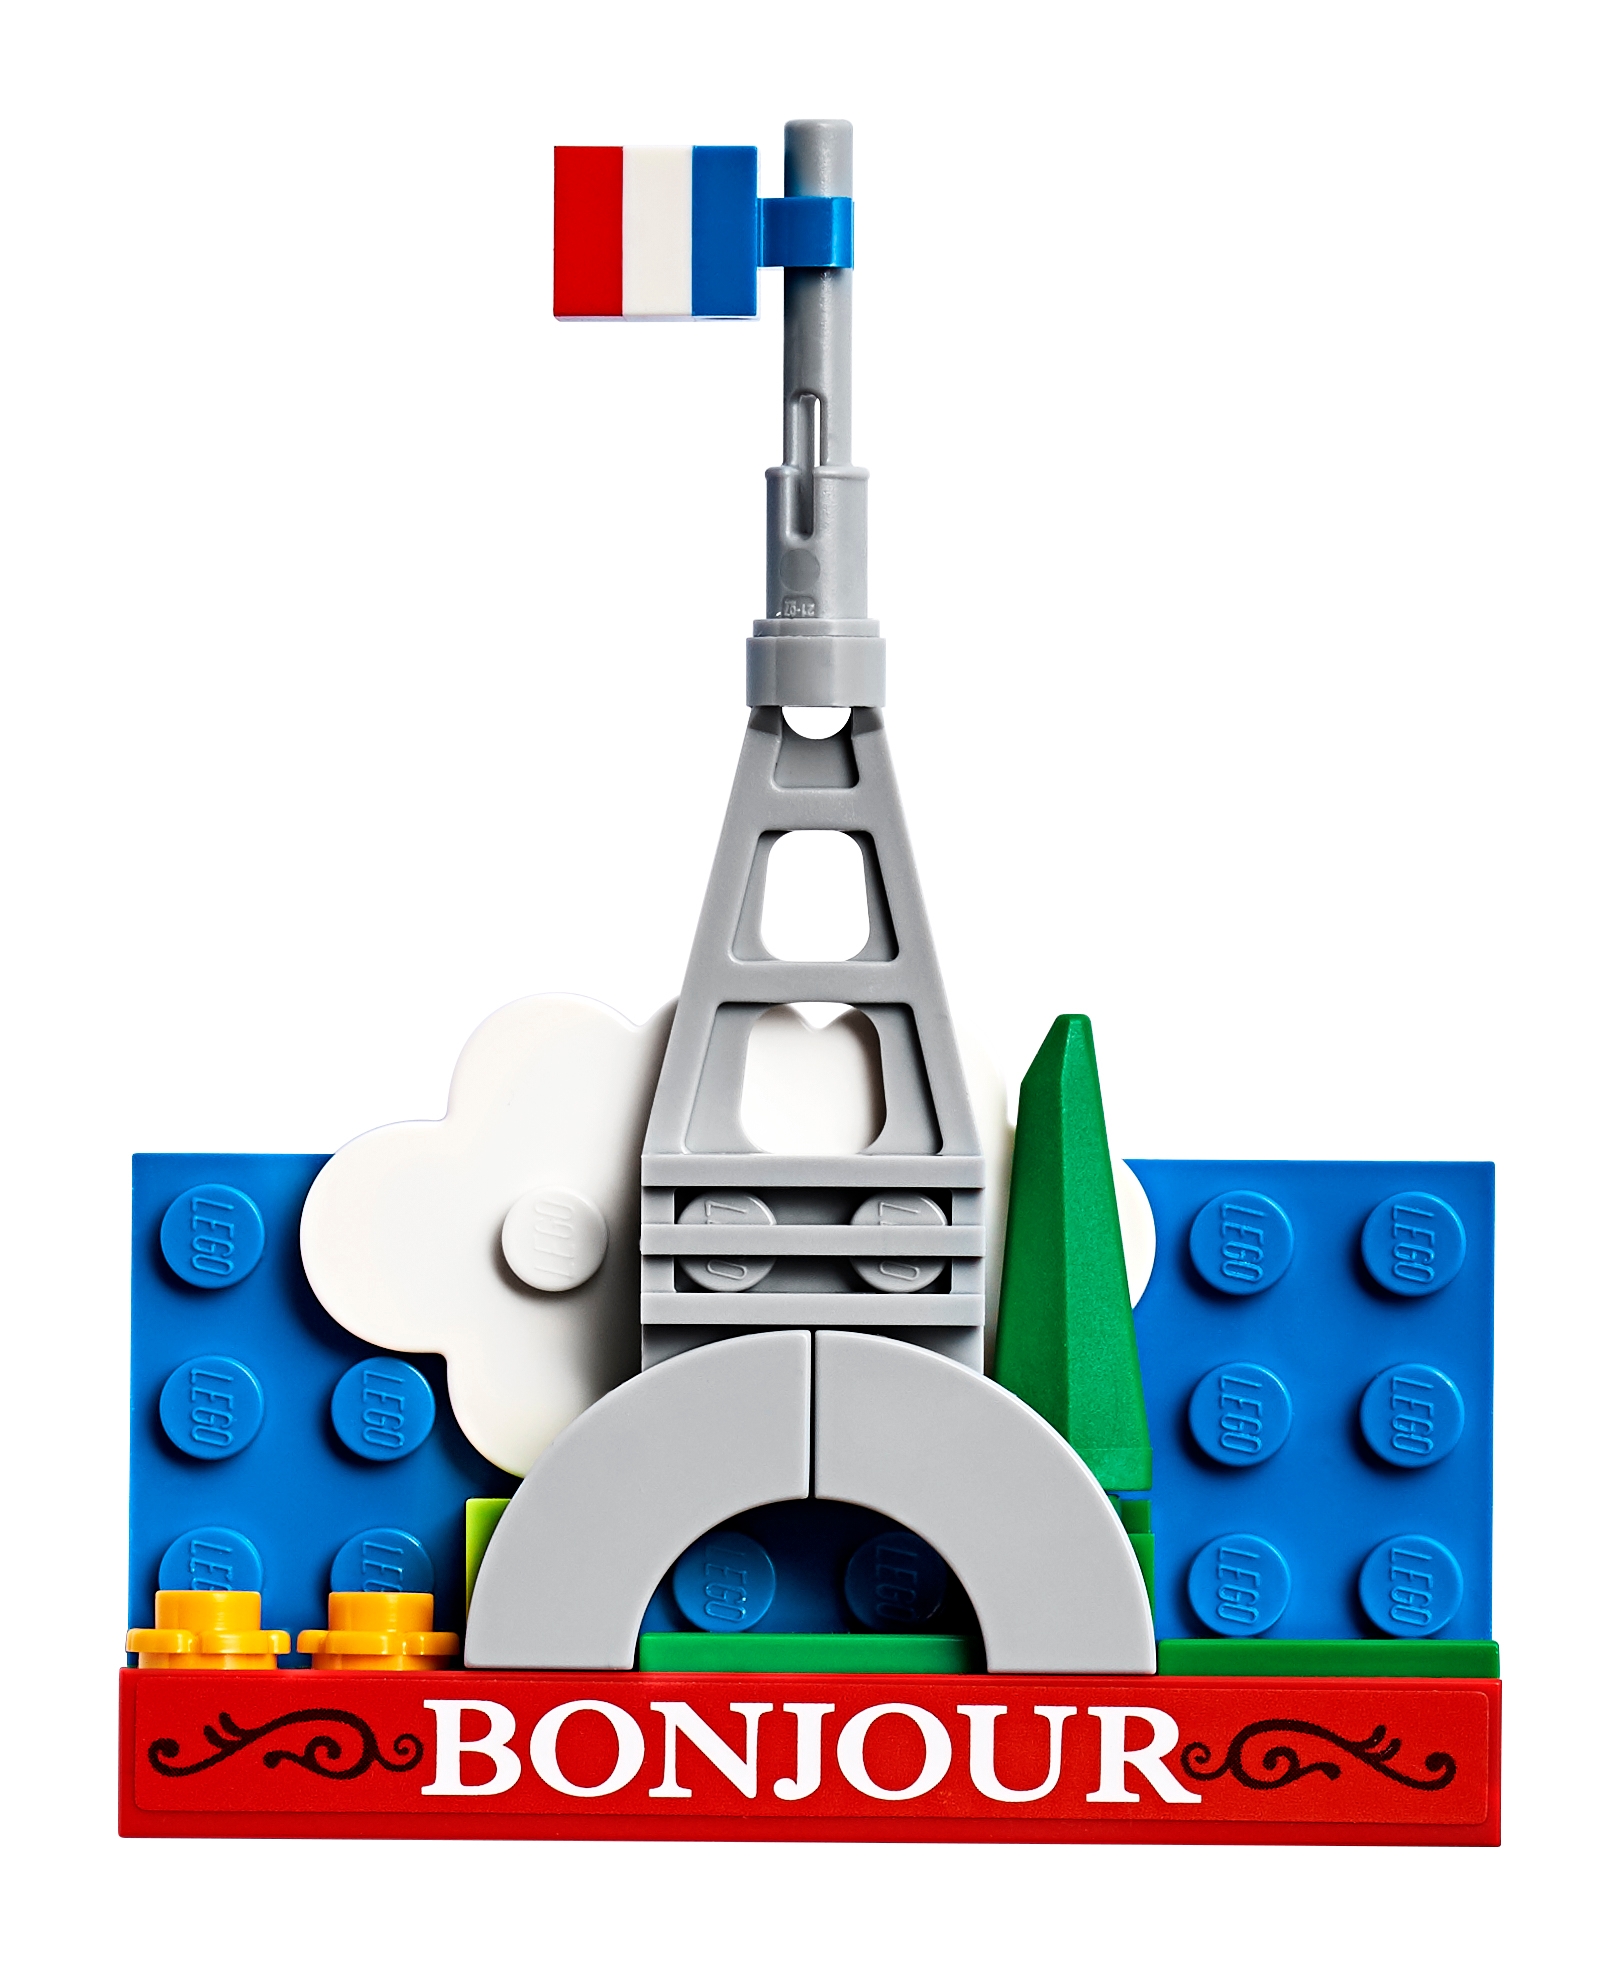 tower lego